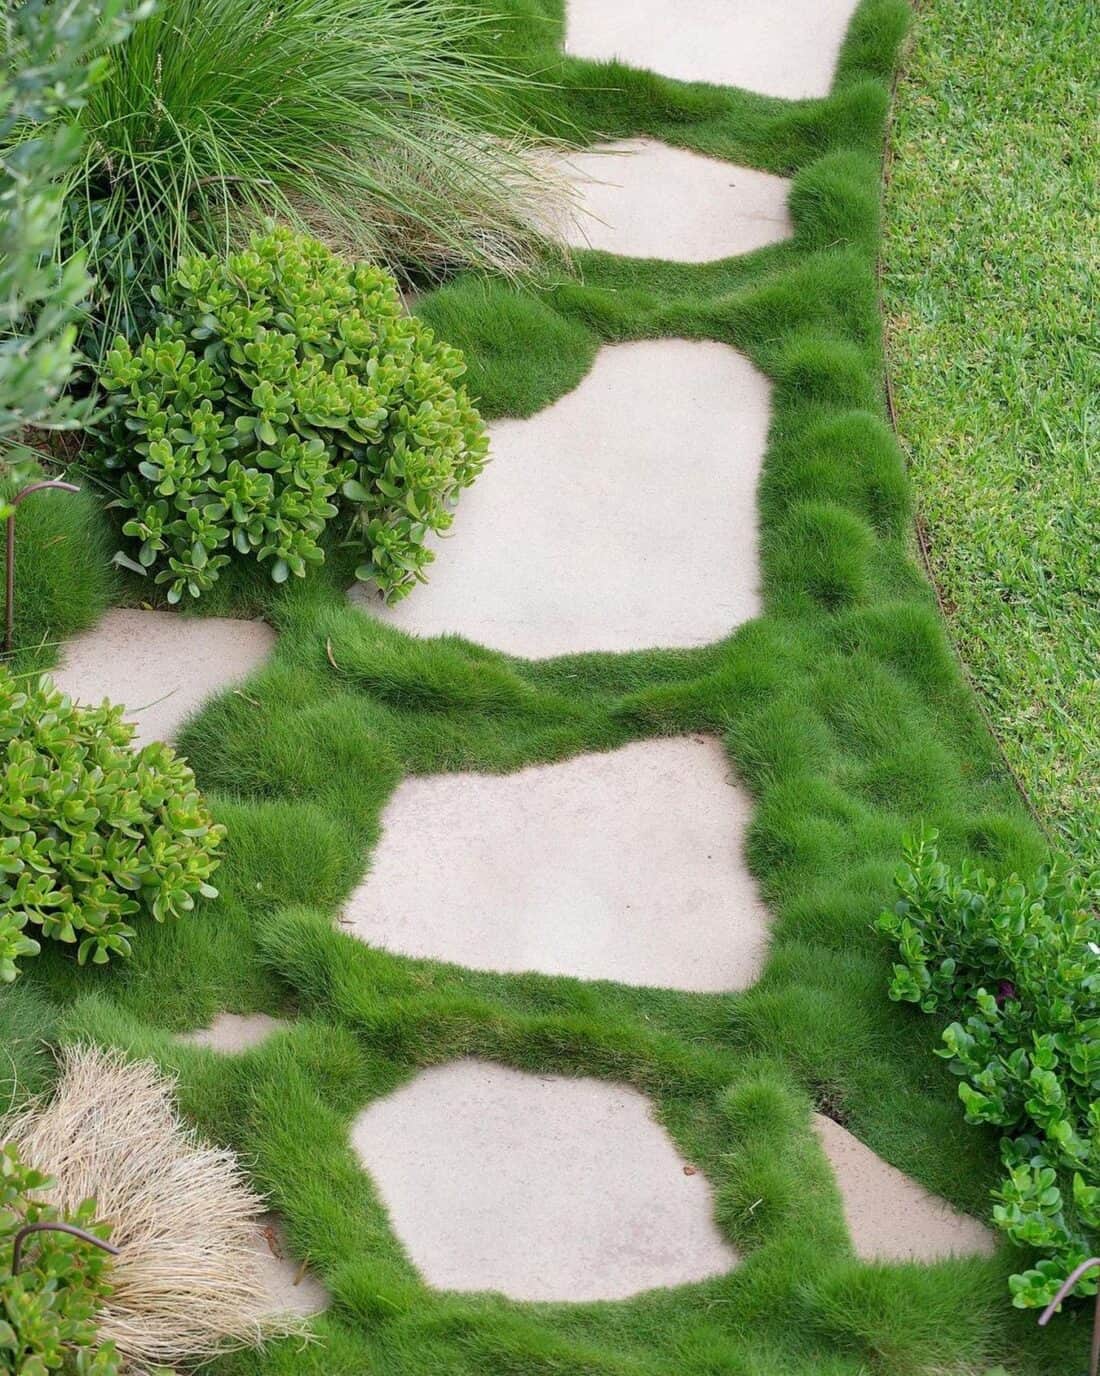 A stepping stone path in a garden with grass.